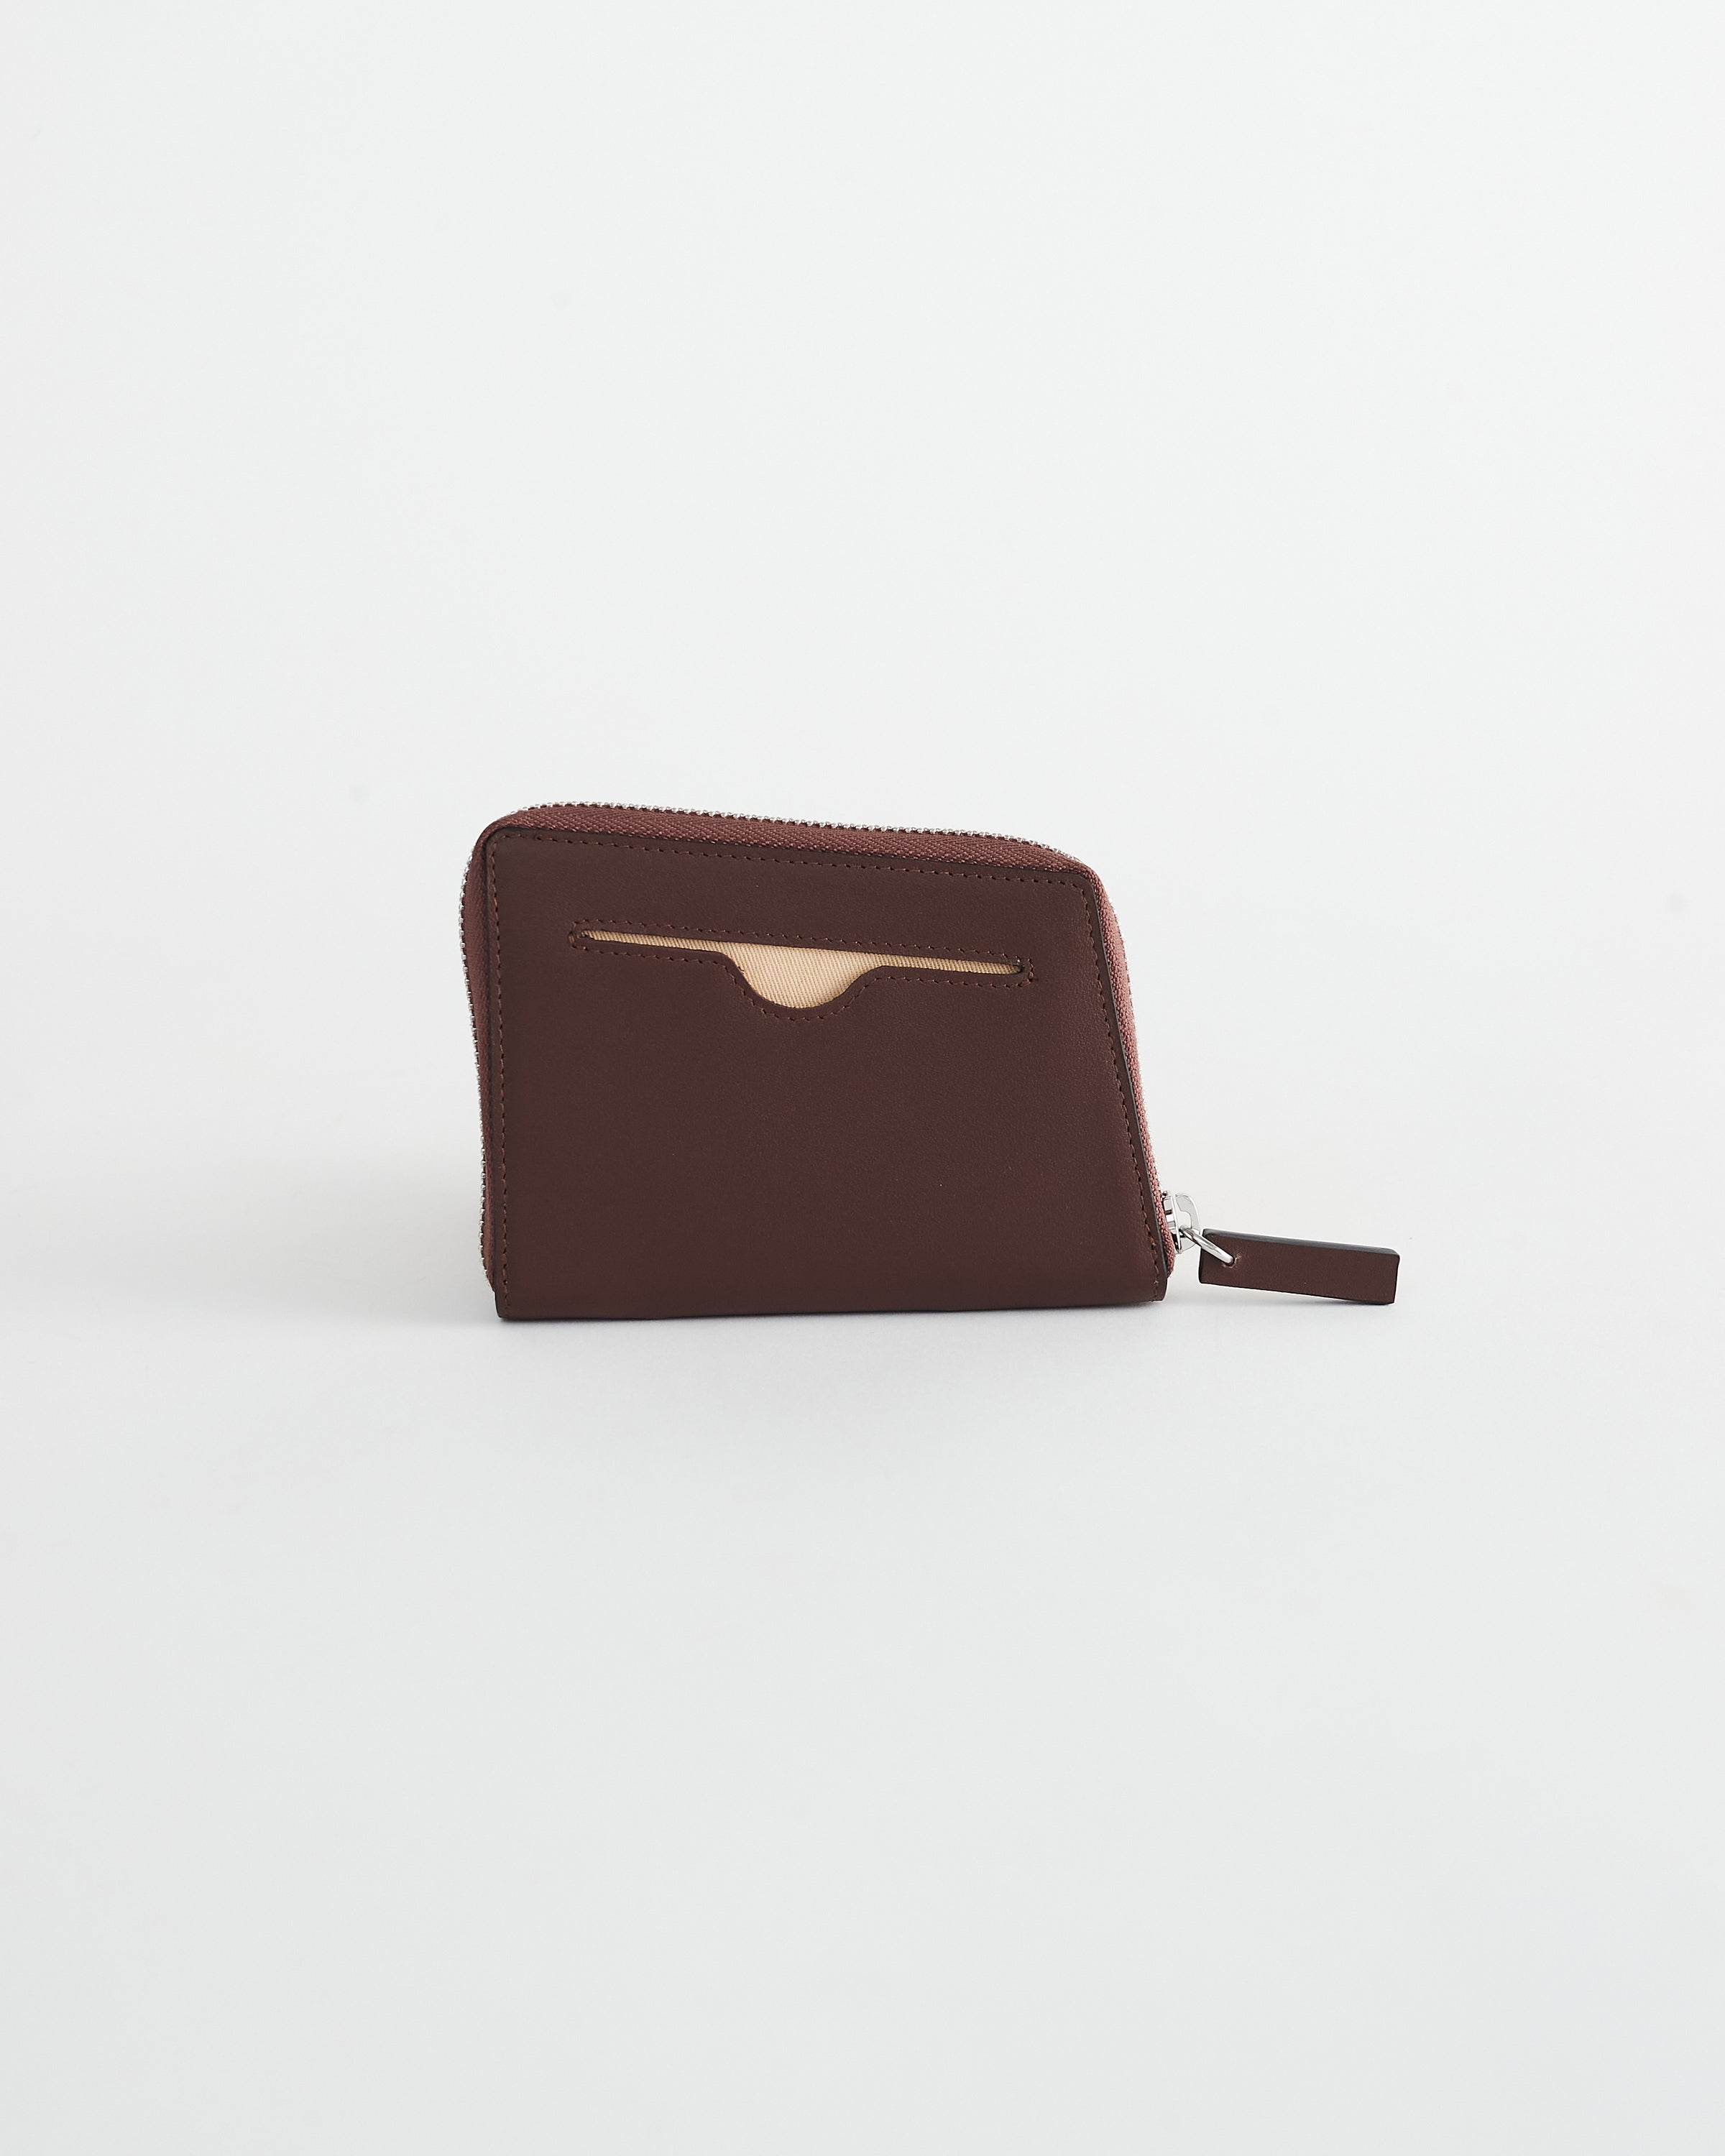 Bo Compact Wallet: Coffee